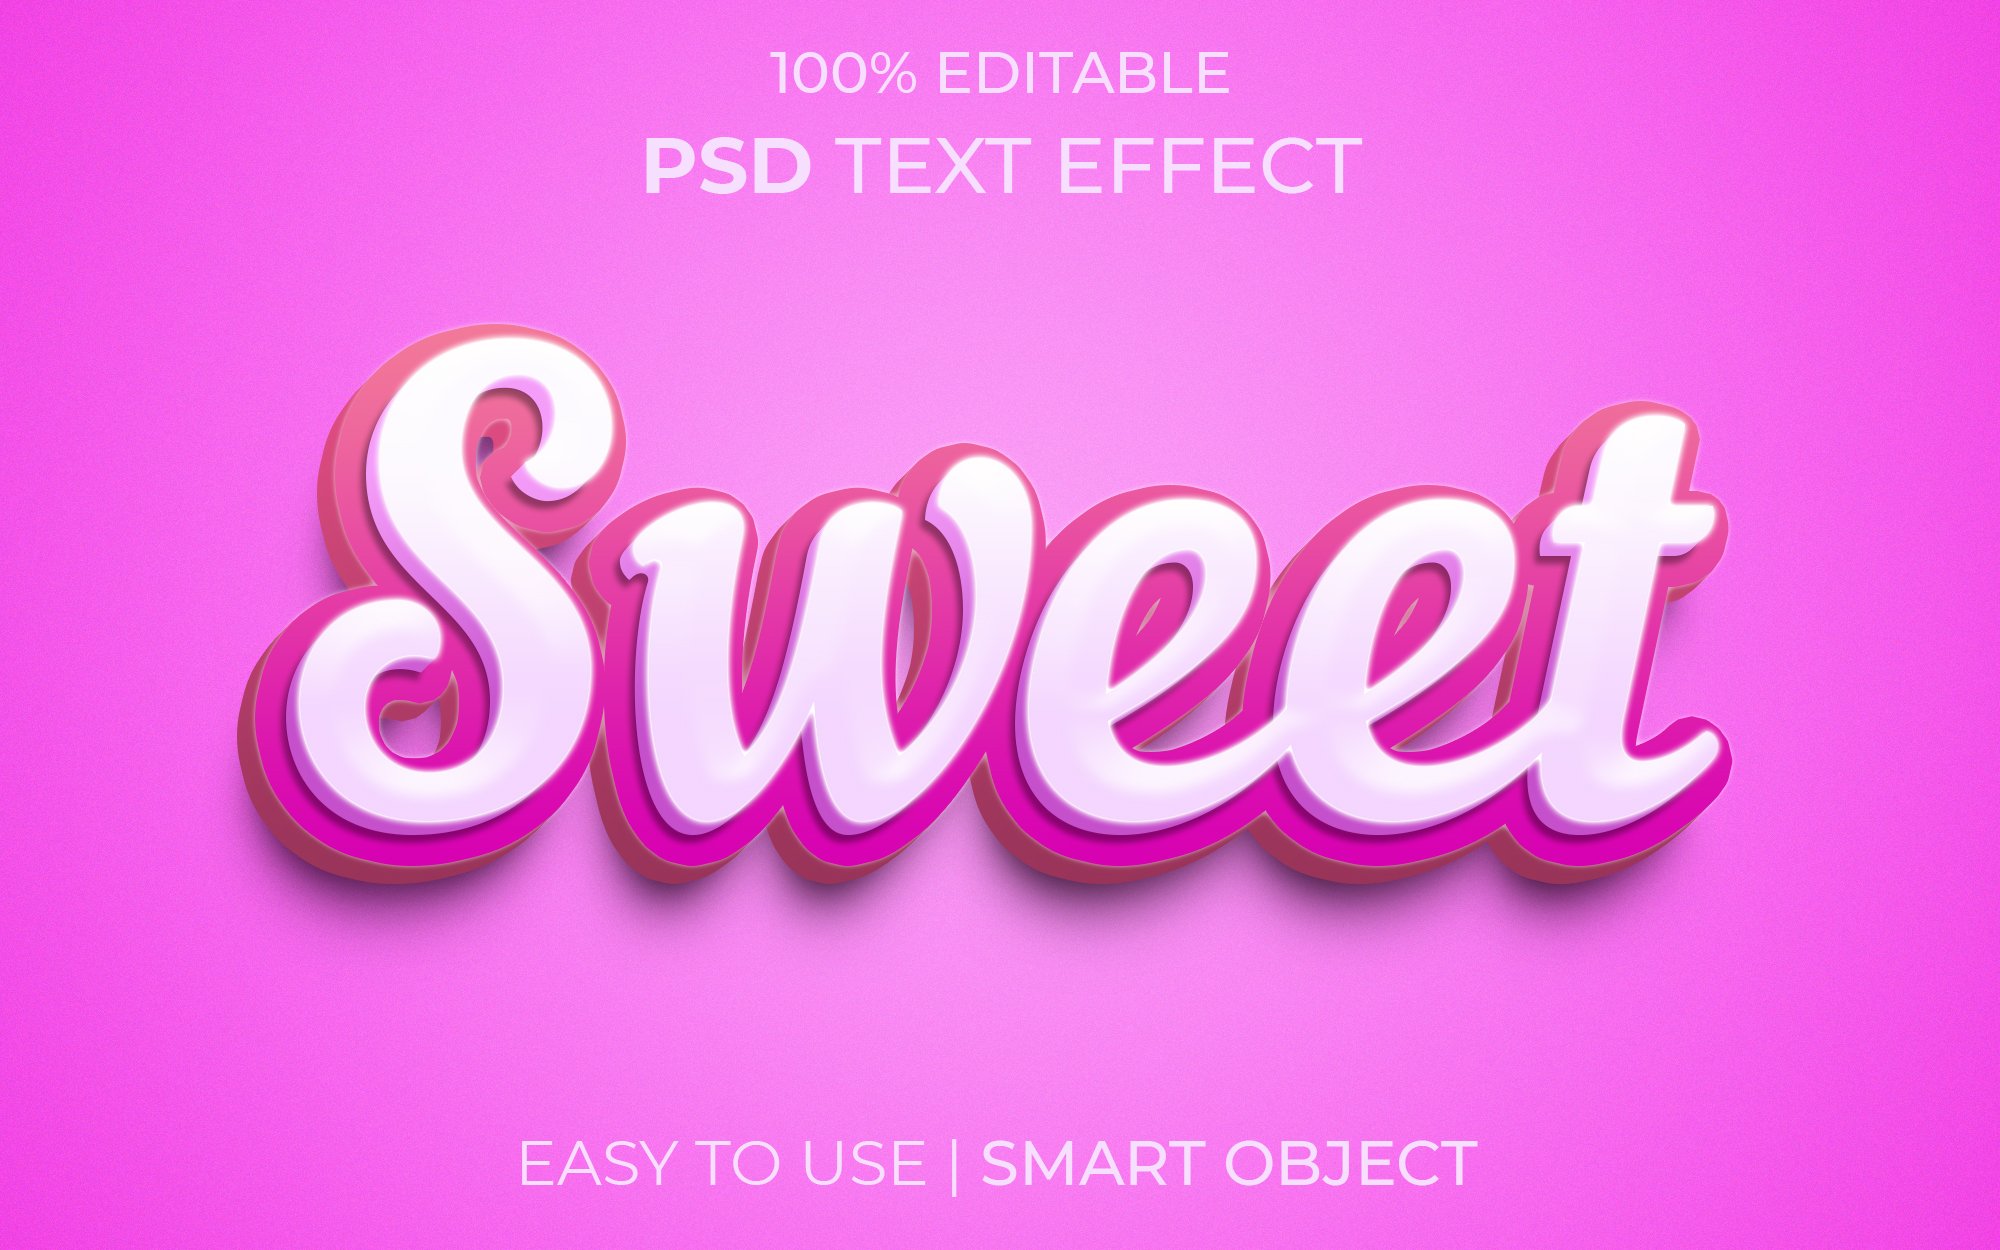 Sweet 3D Text Effectcover image.